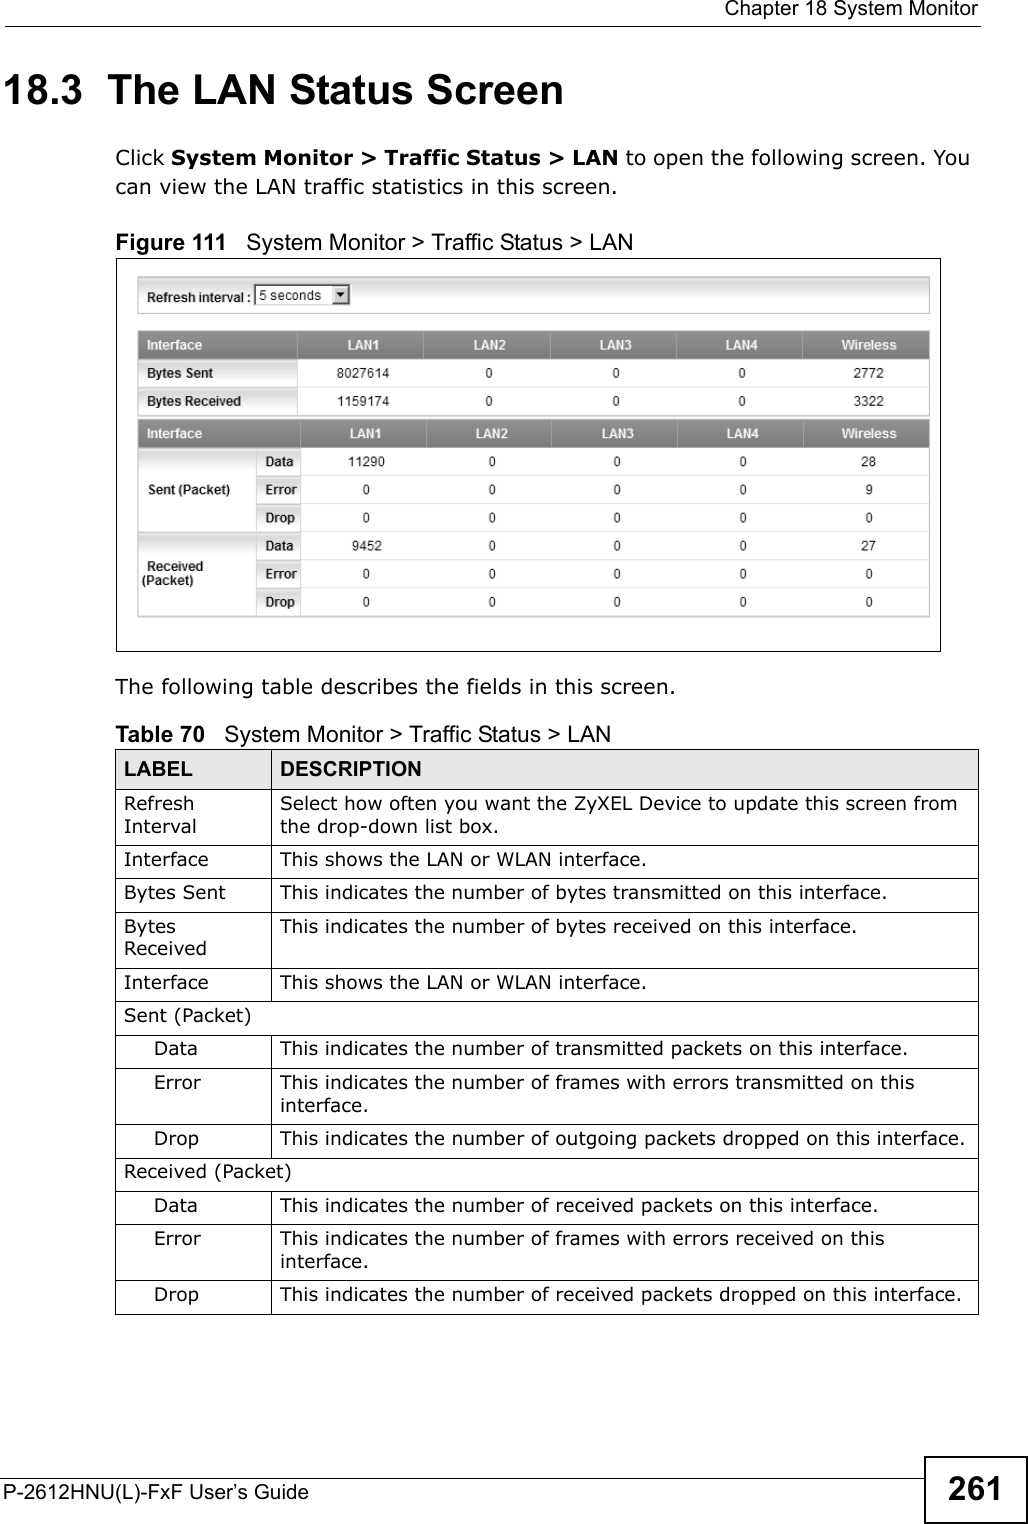  Chapter 18 System MonitorP-2612HNU(L)-FxF User’s Guide 26118.3  The LAN Status ScreenClick System Monitor &gt; Traffic Status &gt; LAN to open the following screen. You can view the LAN traffic statistics in this screen.Figure 111   System Monitor &gt; Traffic Status &gt; LANThe following table describes the fields in this screen.   Table 70   System Monitor &gt; Traffic Status &gt; LANLABEL DESCRIPTIONRefreshIntervalSelect how often you want the ZyXEL Device to update this screen from the drop-down list box.Interface This shows the LAN or WLAN interface. Bytes Sent This indicates the number of bytes transmitted on this interface.Bytes ReceivedThis indicates the number of bytes received on this interface.Interface This shows the LAN or WLAN interface. Sent (Packet)  Data  This indicates the number of transmitted packets on this interface.Error This indicates the number of frames with errors transmitted on this interface.Drop This indicates the number of outgoing packets dropped on this interface.Received (Packet)Data  This indicates the number of received packets on this interface.Error This indicates the number of frames with errors received on this interface.Drop This indicates the number of received packets dropped on this interface.